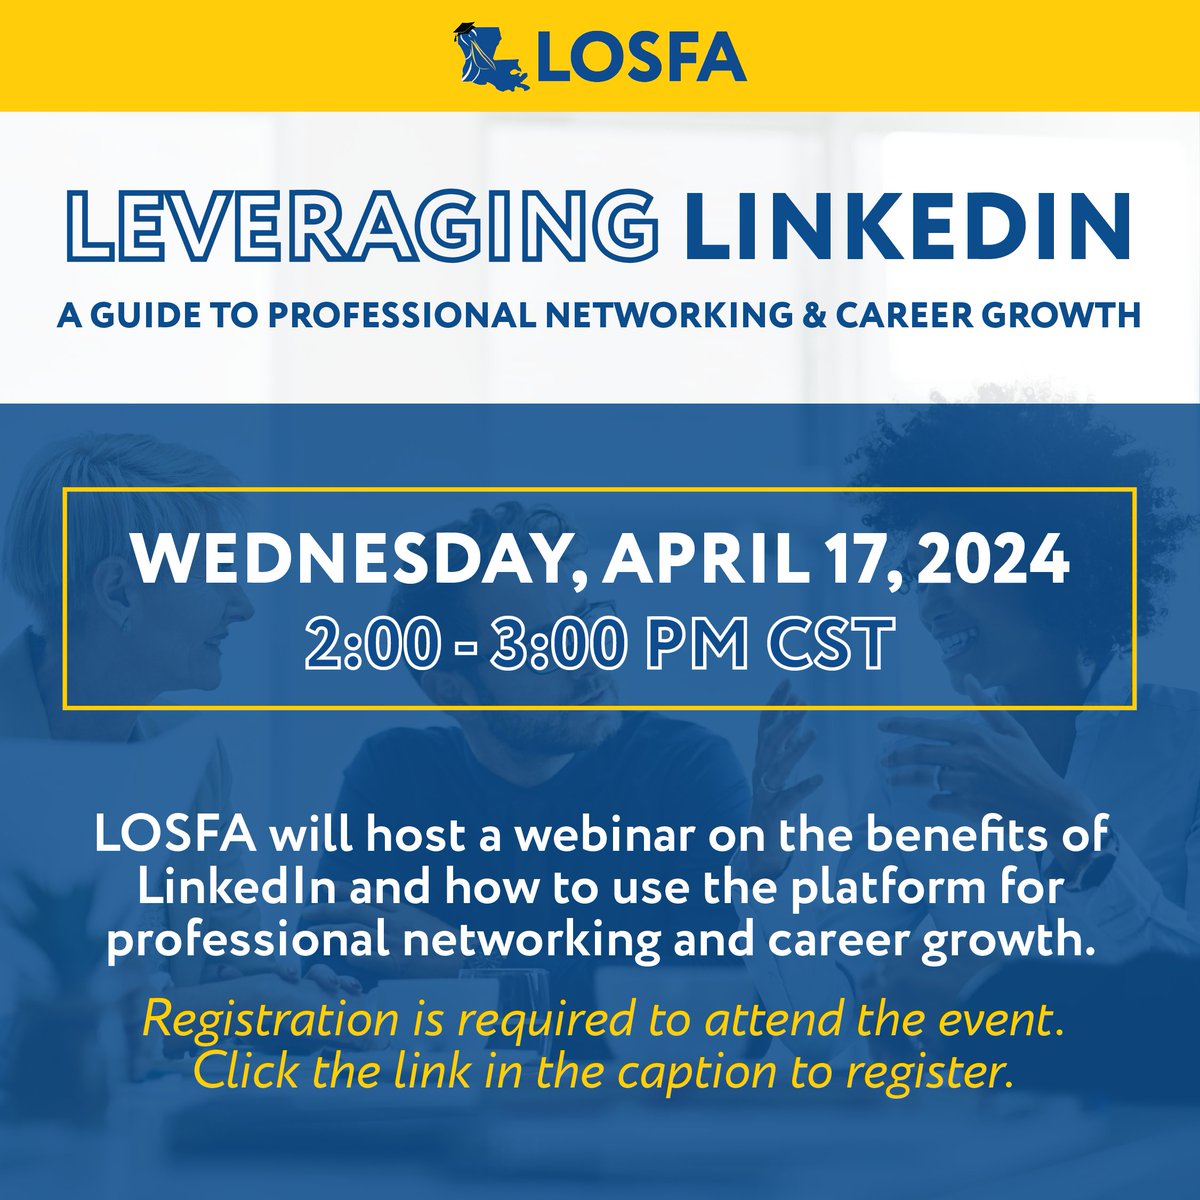 Want to maximize your LinkedIn presence and career opportunities? Join us for an informative webinar on how to make the most out of your LinkedIn profile. Learn top tips and tricks for networking, job searching, and personal branding. Register here: ow.ly/P5aW50RbJXs